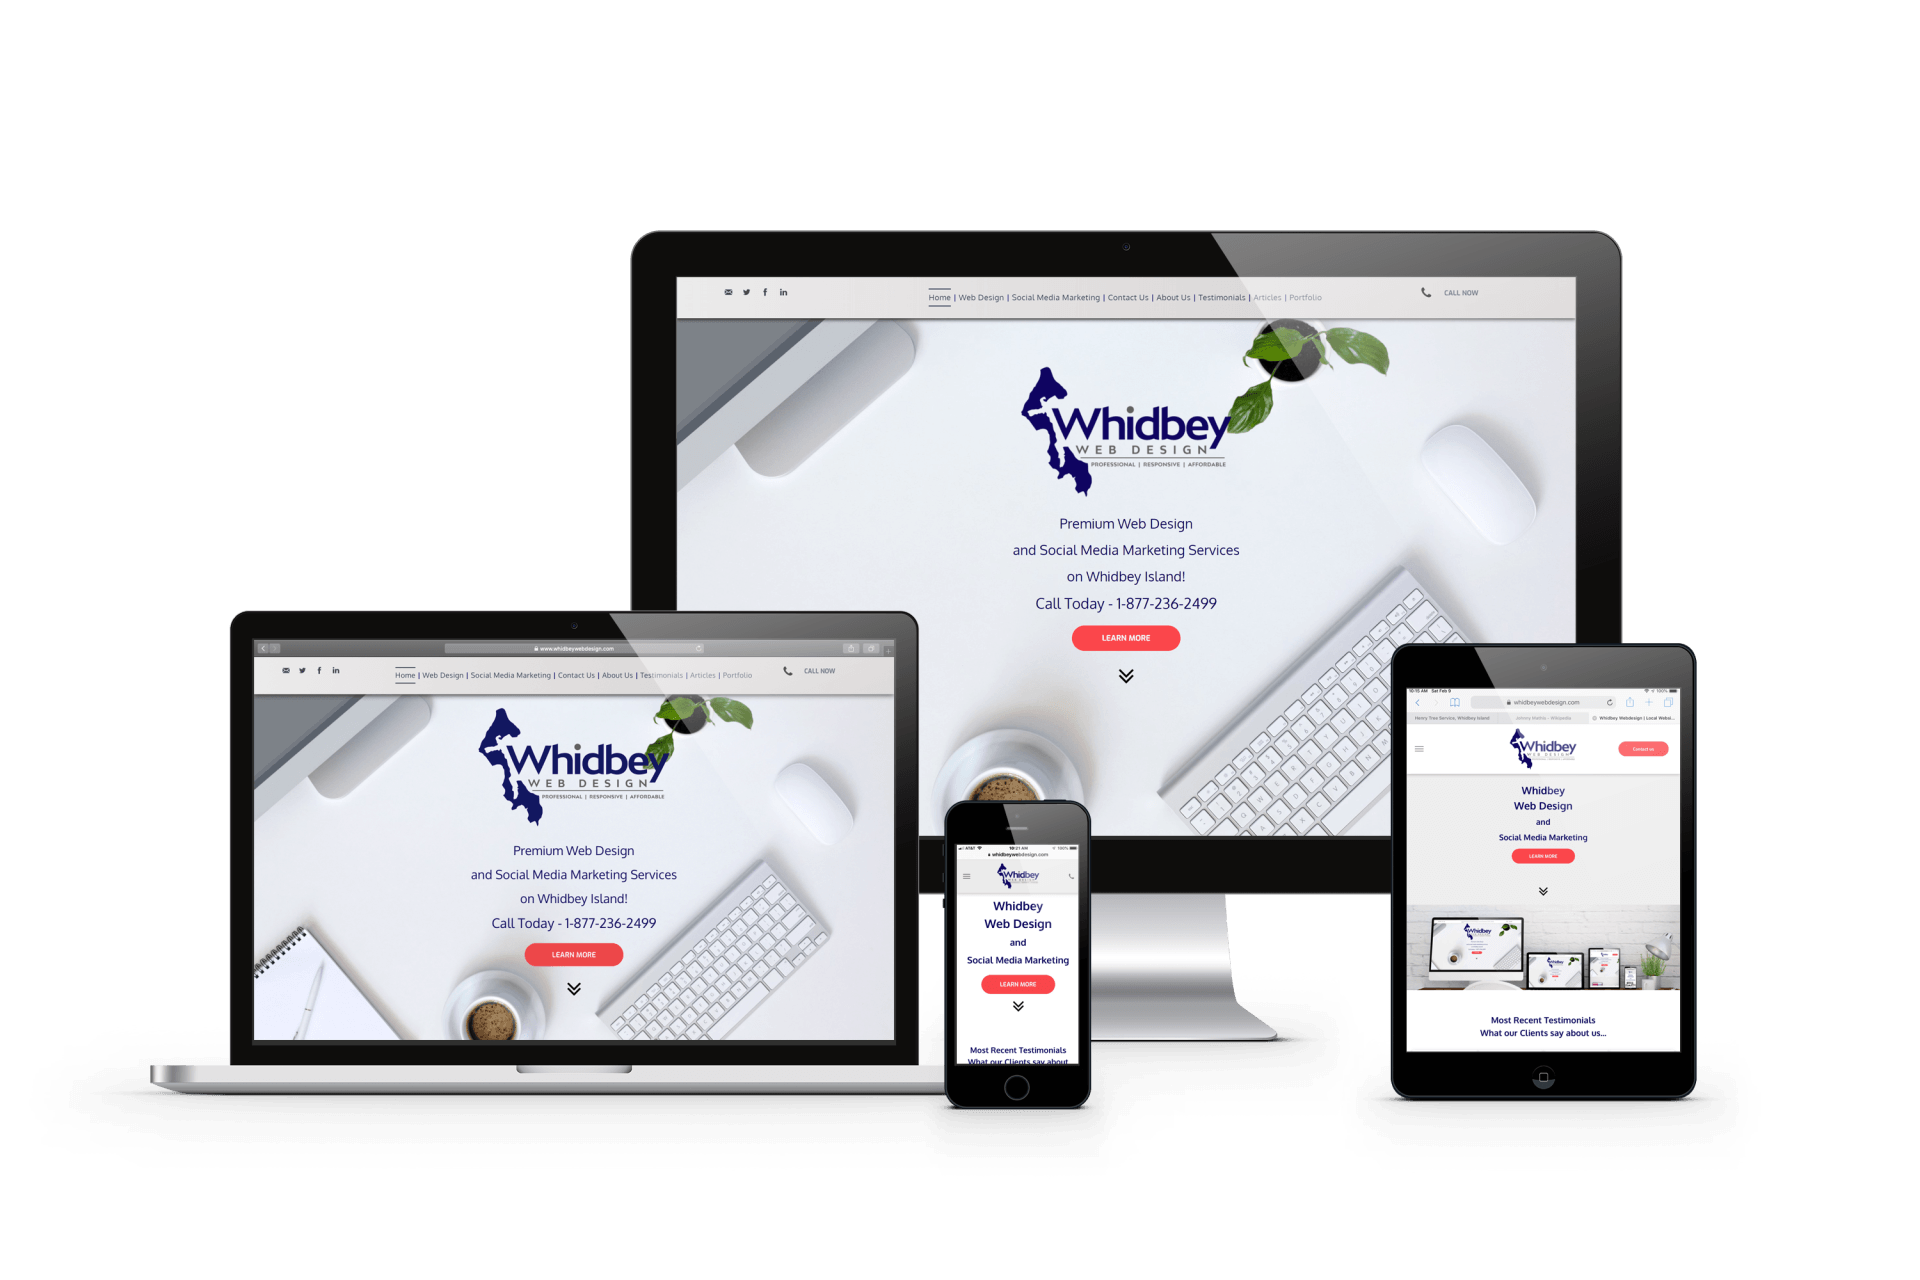 Whidbey Island's premere web design and development firm provides local businesses and organization web design and website development services that are affordable and generate results.